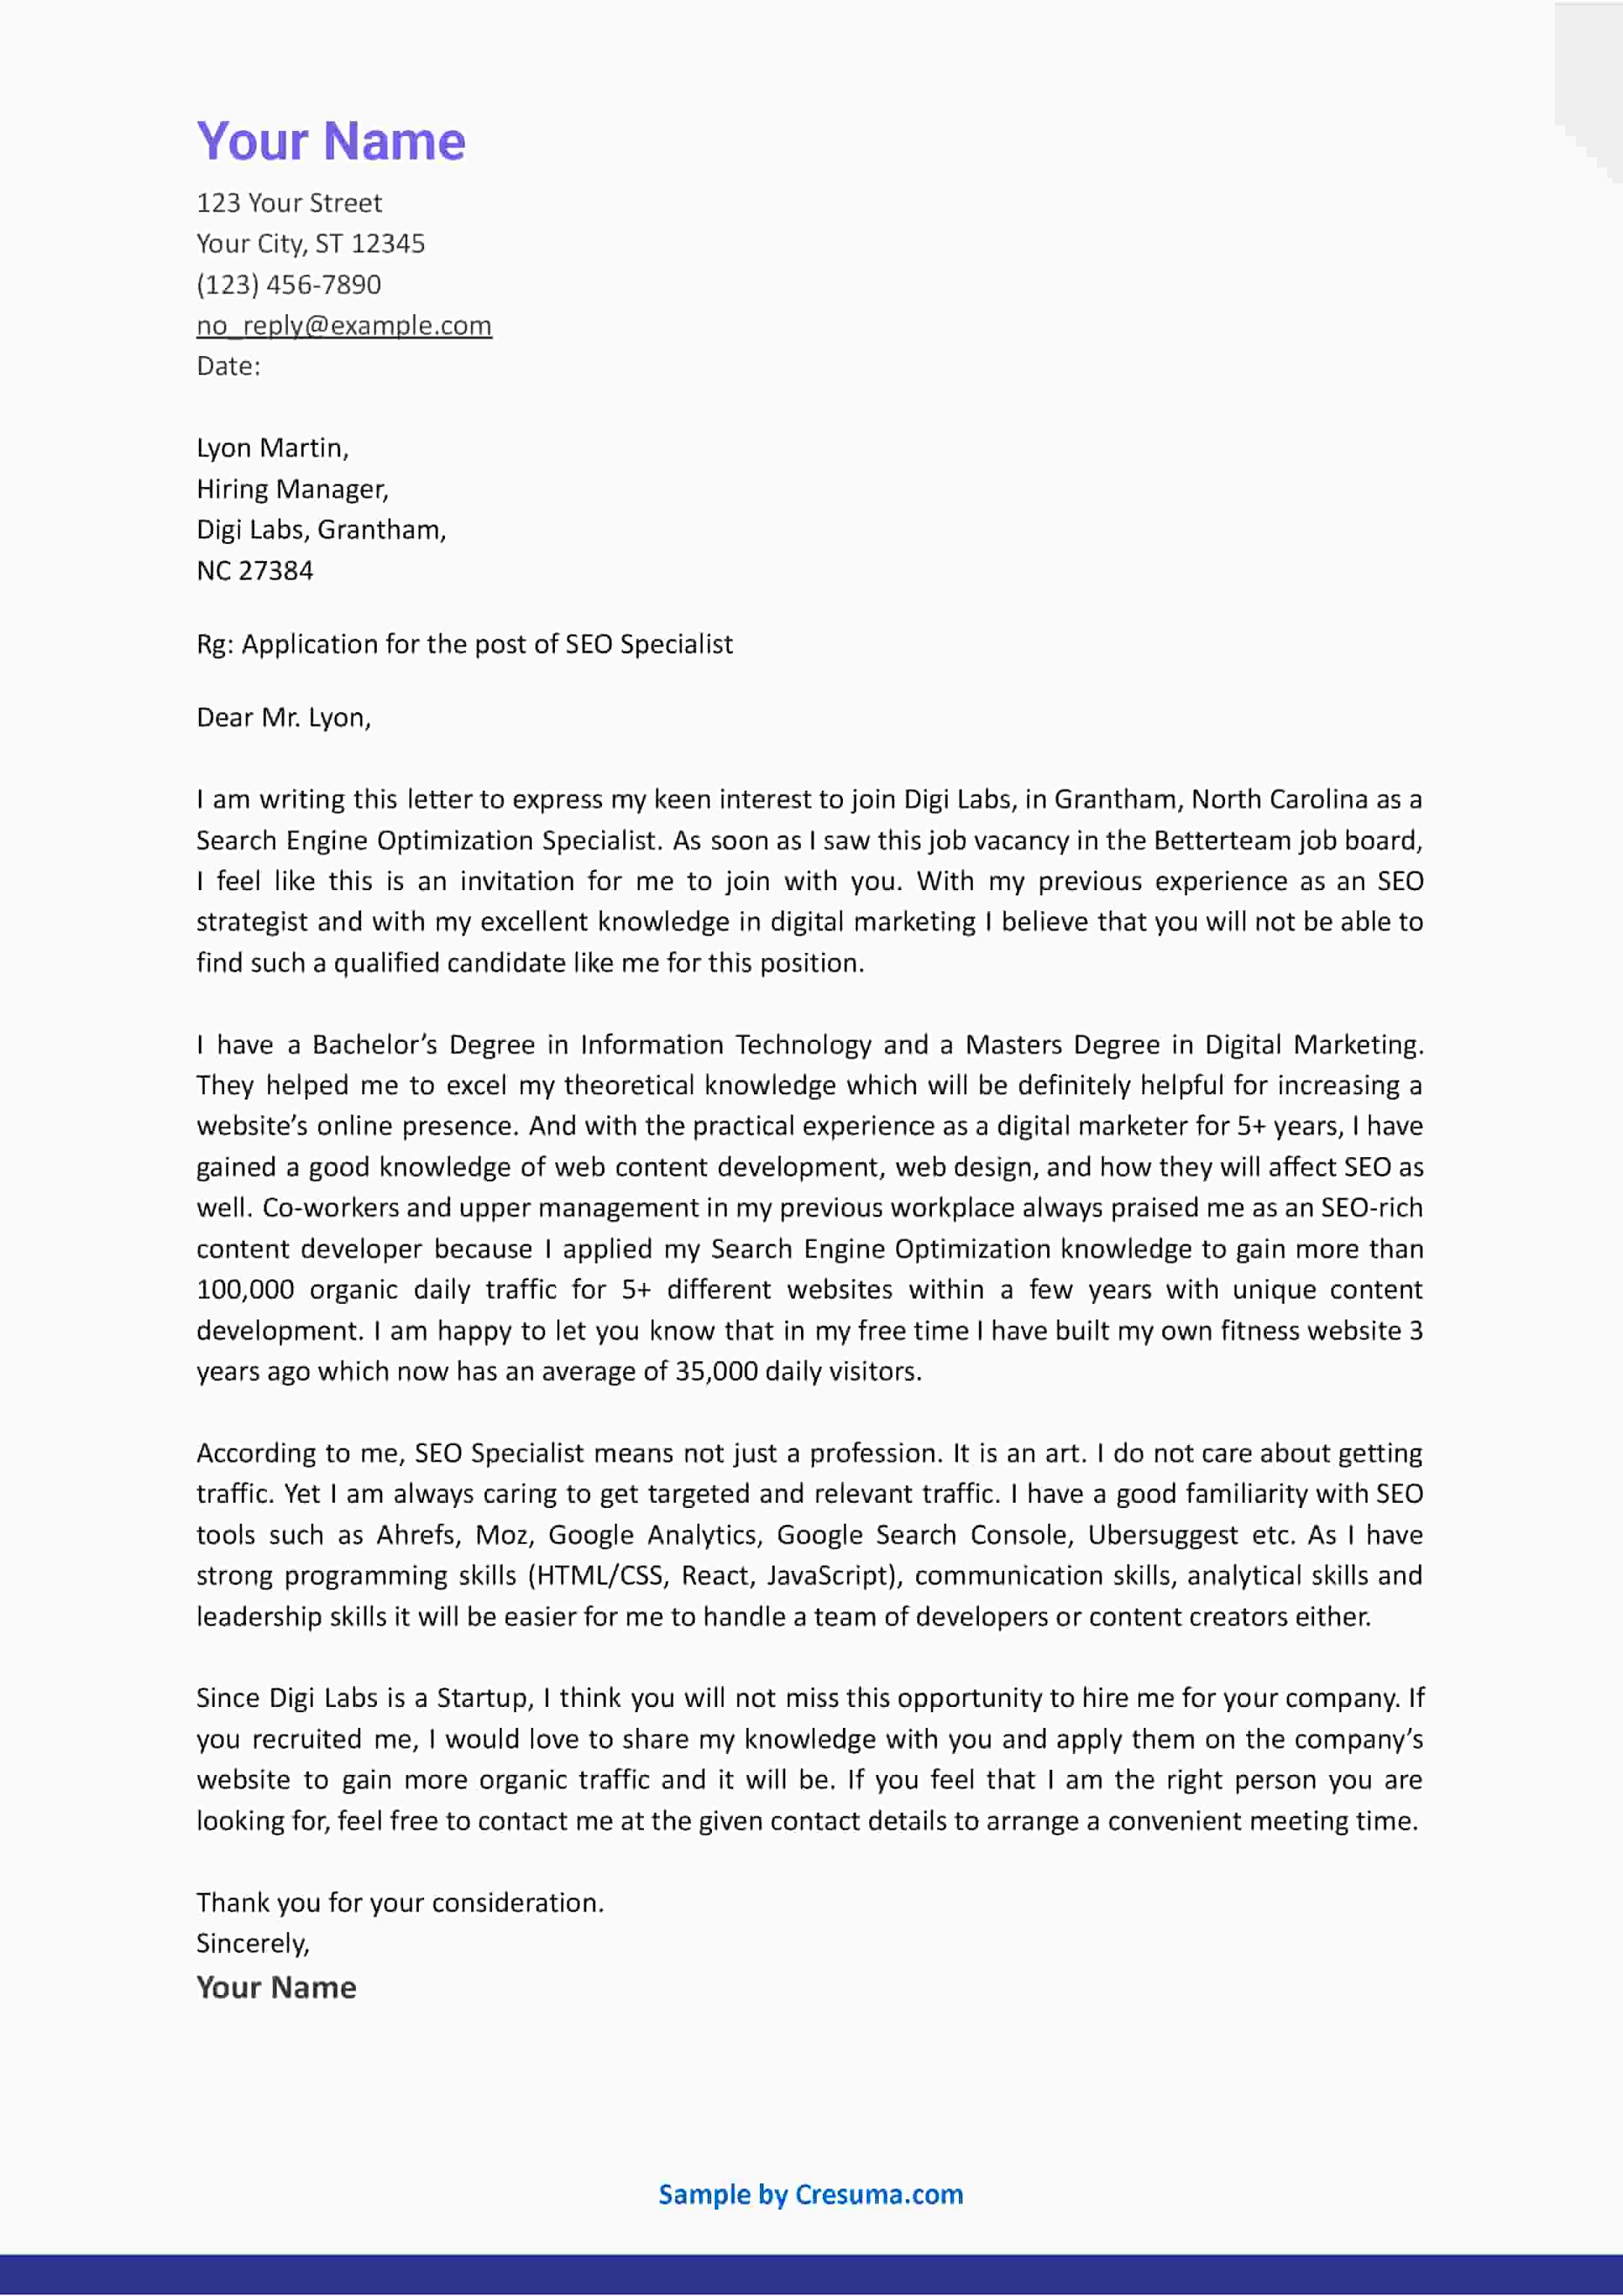 SEO Specialist cover letter example template 3